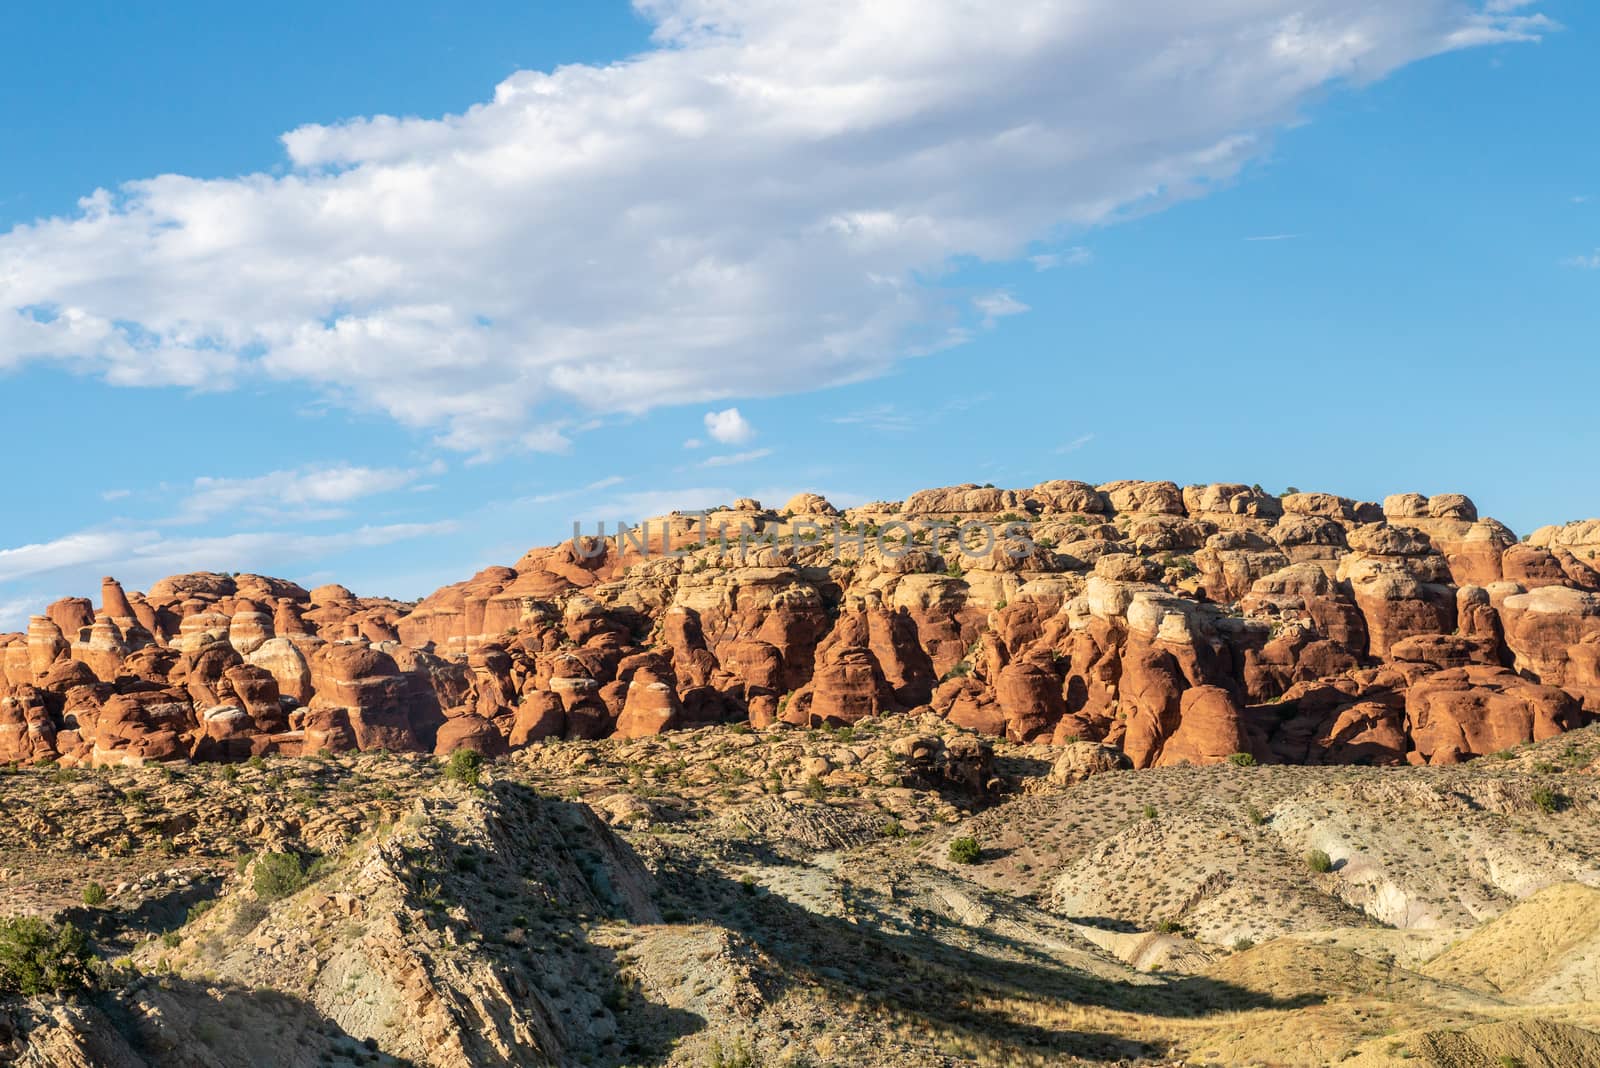 View of Fiery Furnace in Arches National Park, Utah by Njean